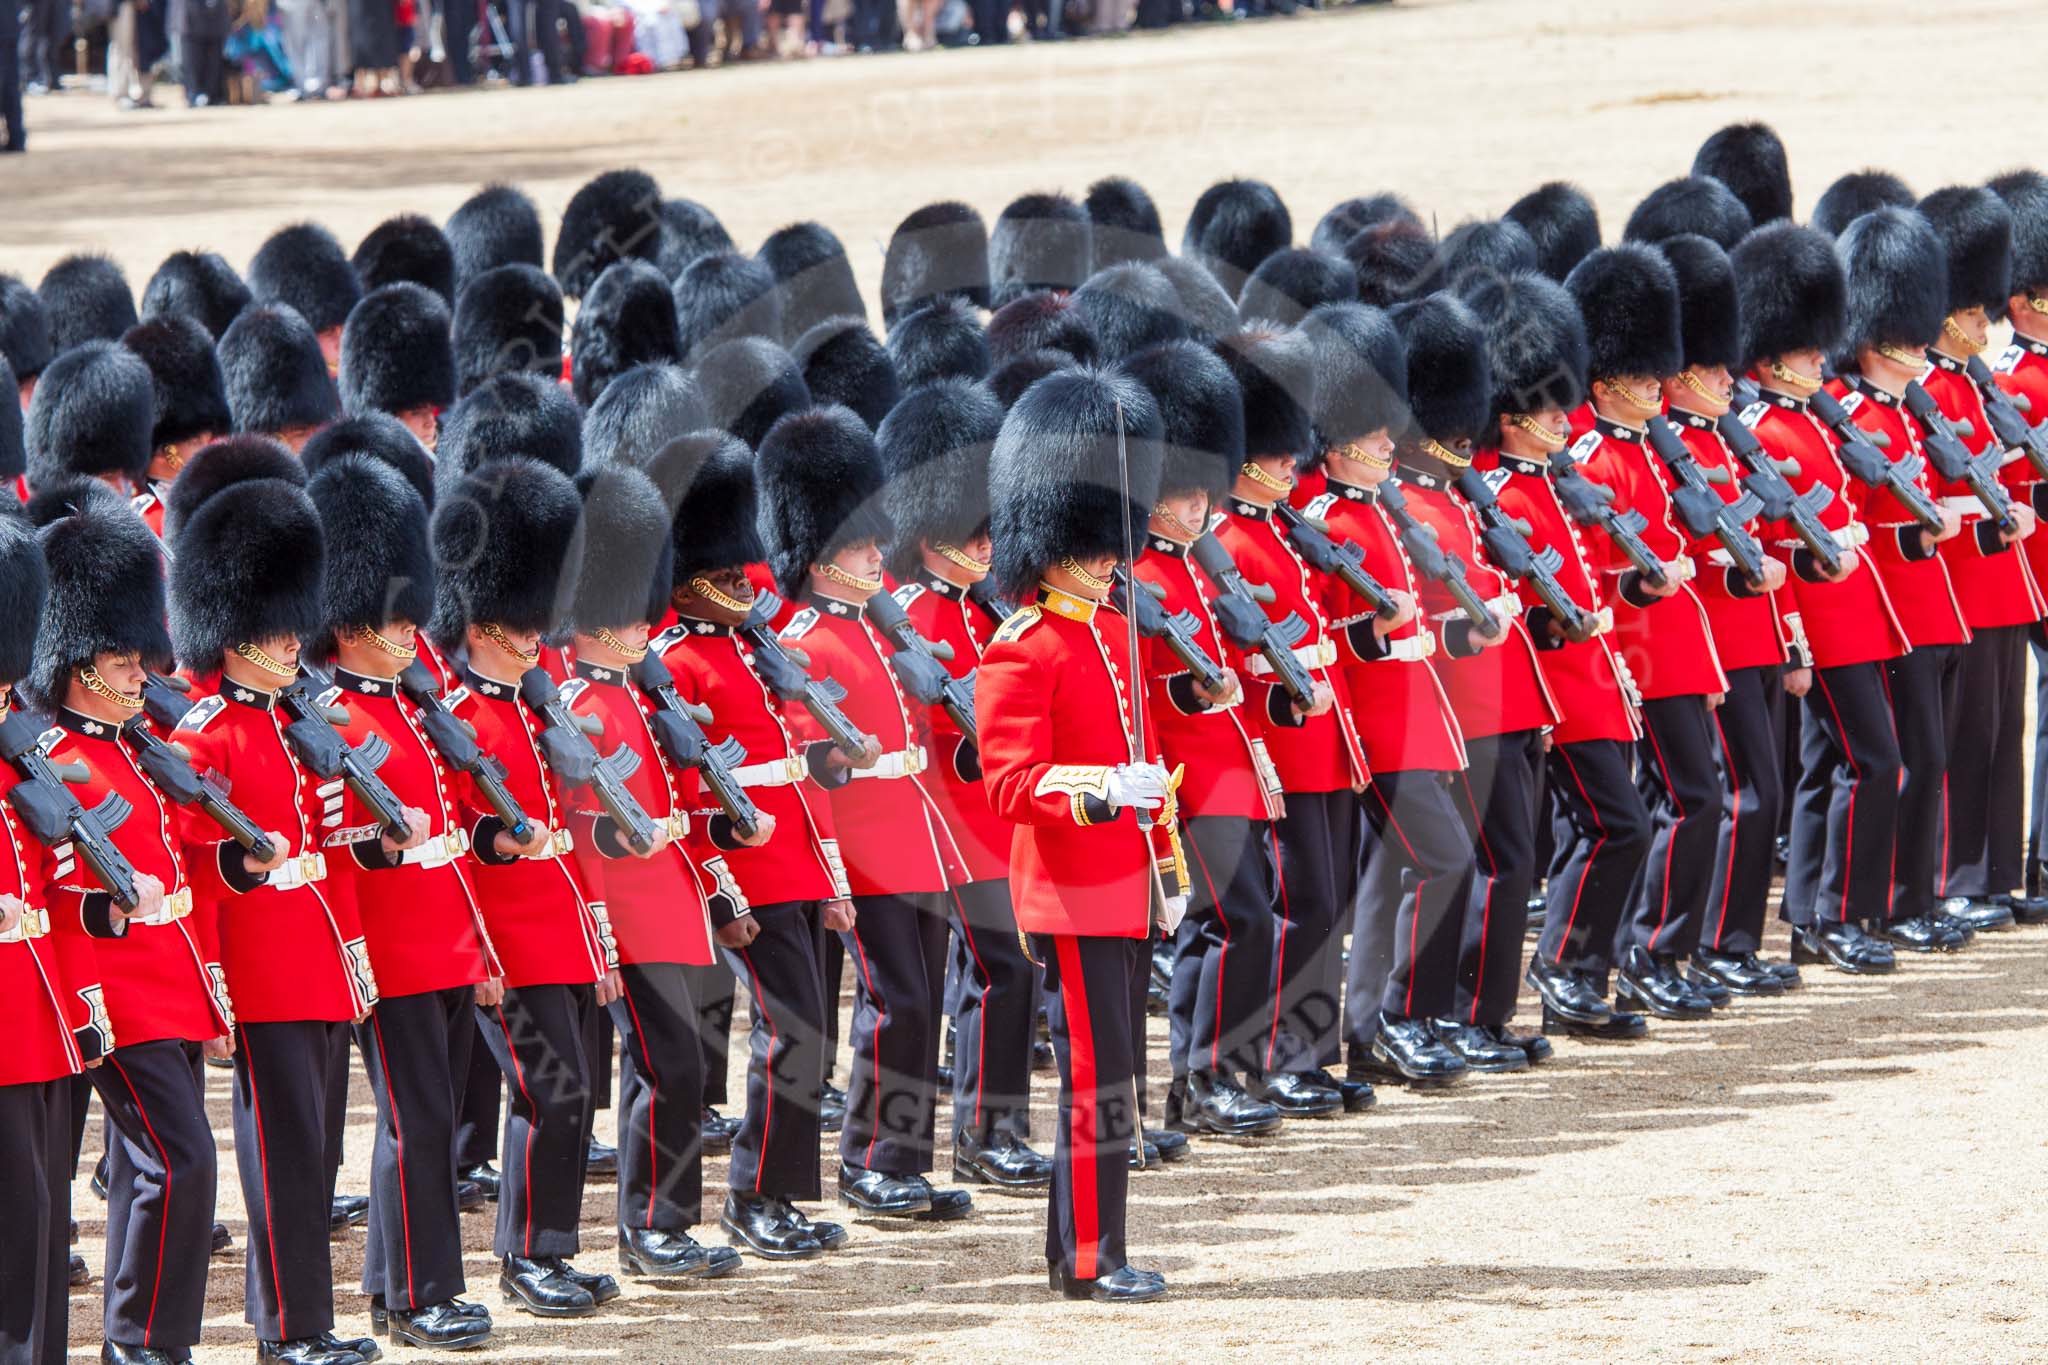 Trooping the Colour 2013: No. 4 Guard, Nijmegen Company Grenadier Guards, during the March Past, in front, with his sword drawn, Second Lieutenant D R Wellham. Image #545, 15 June 2013 11:37 Horse Guards Parade, London, UK